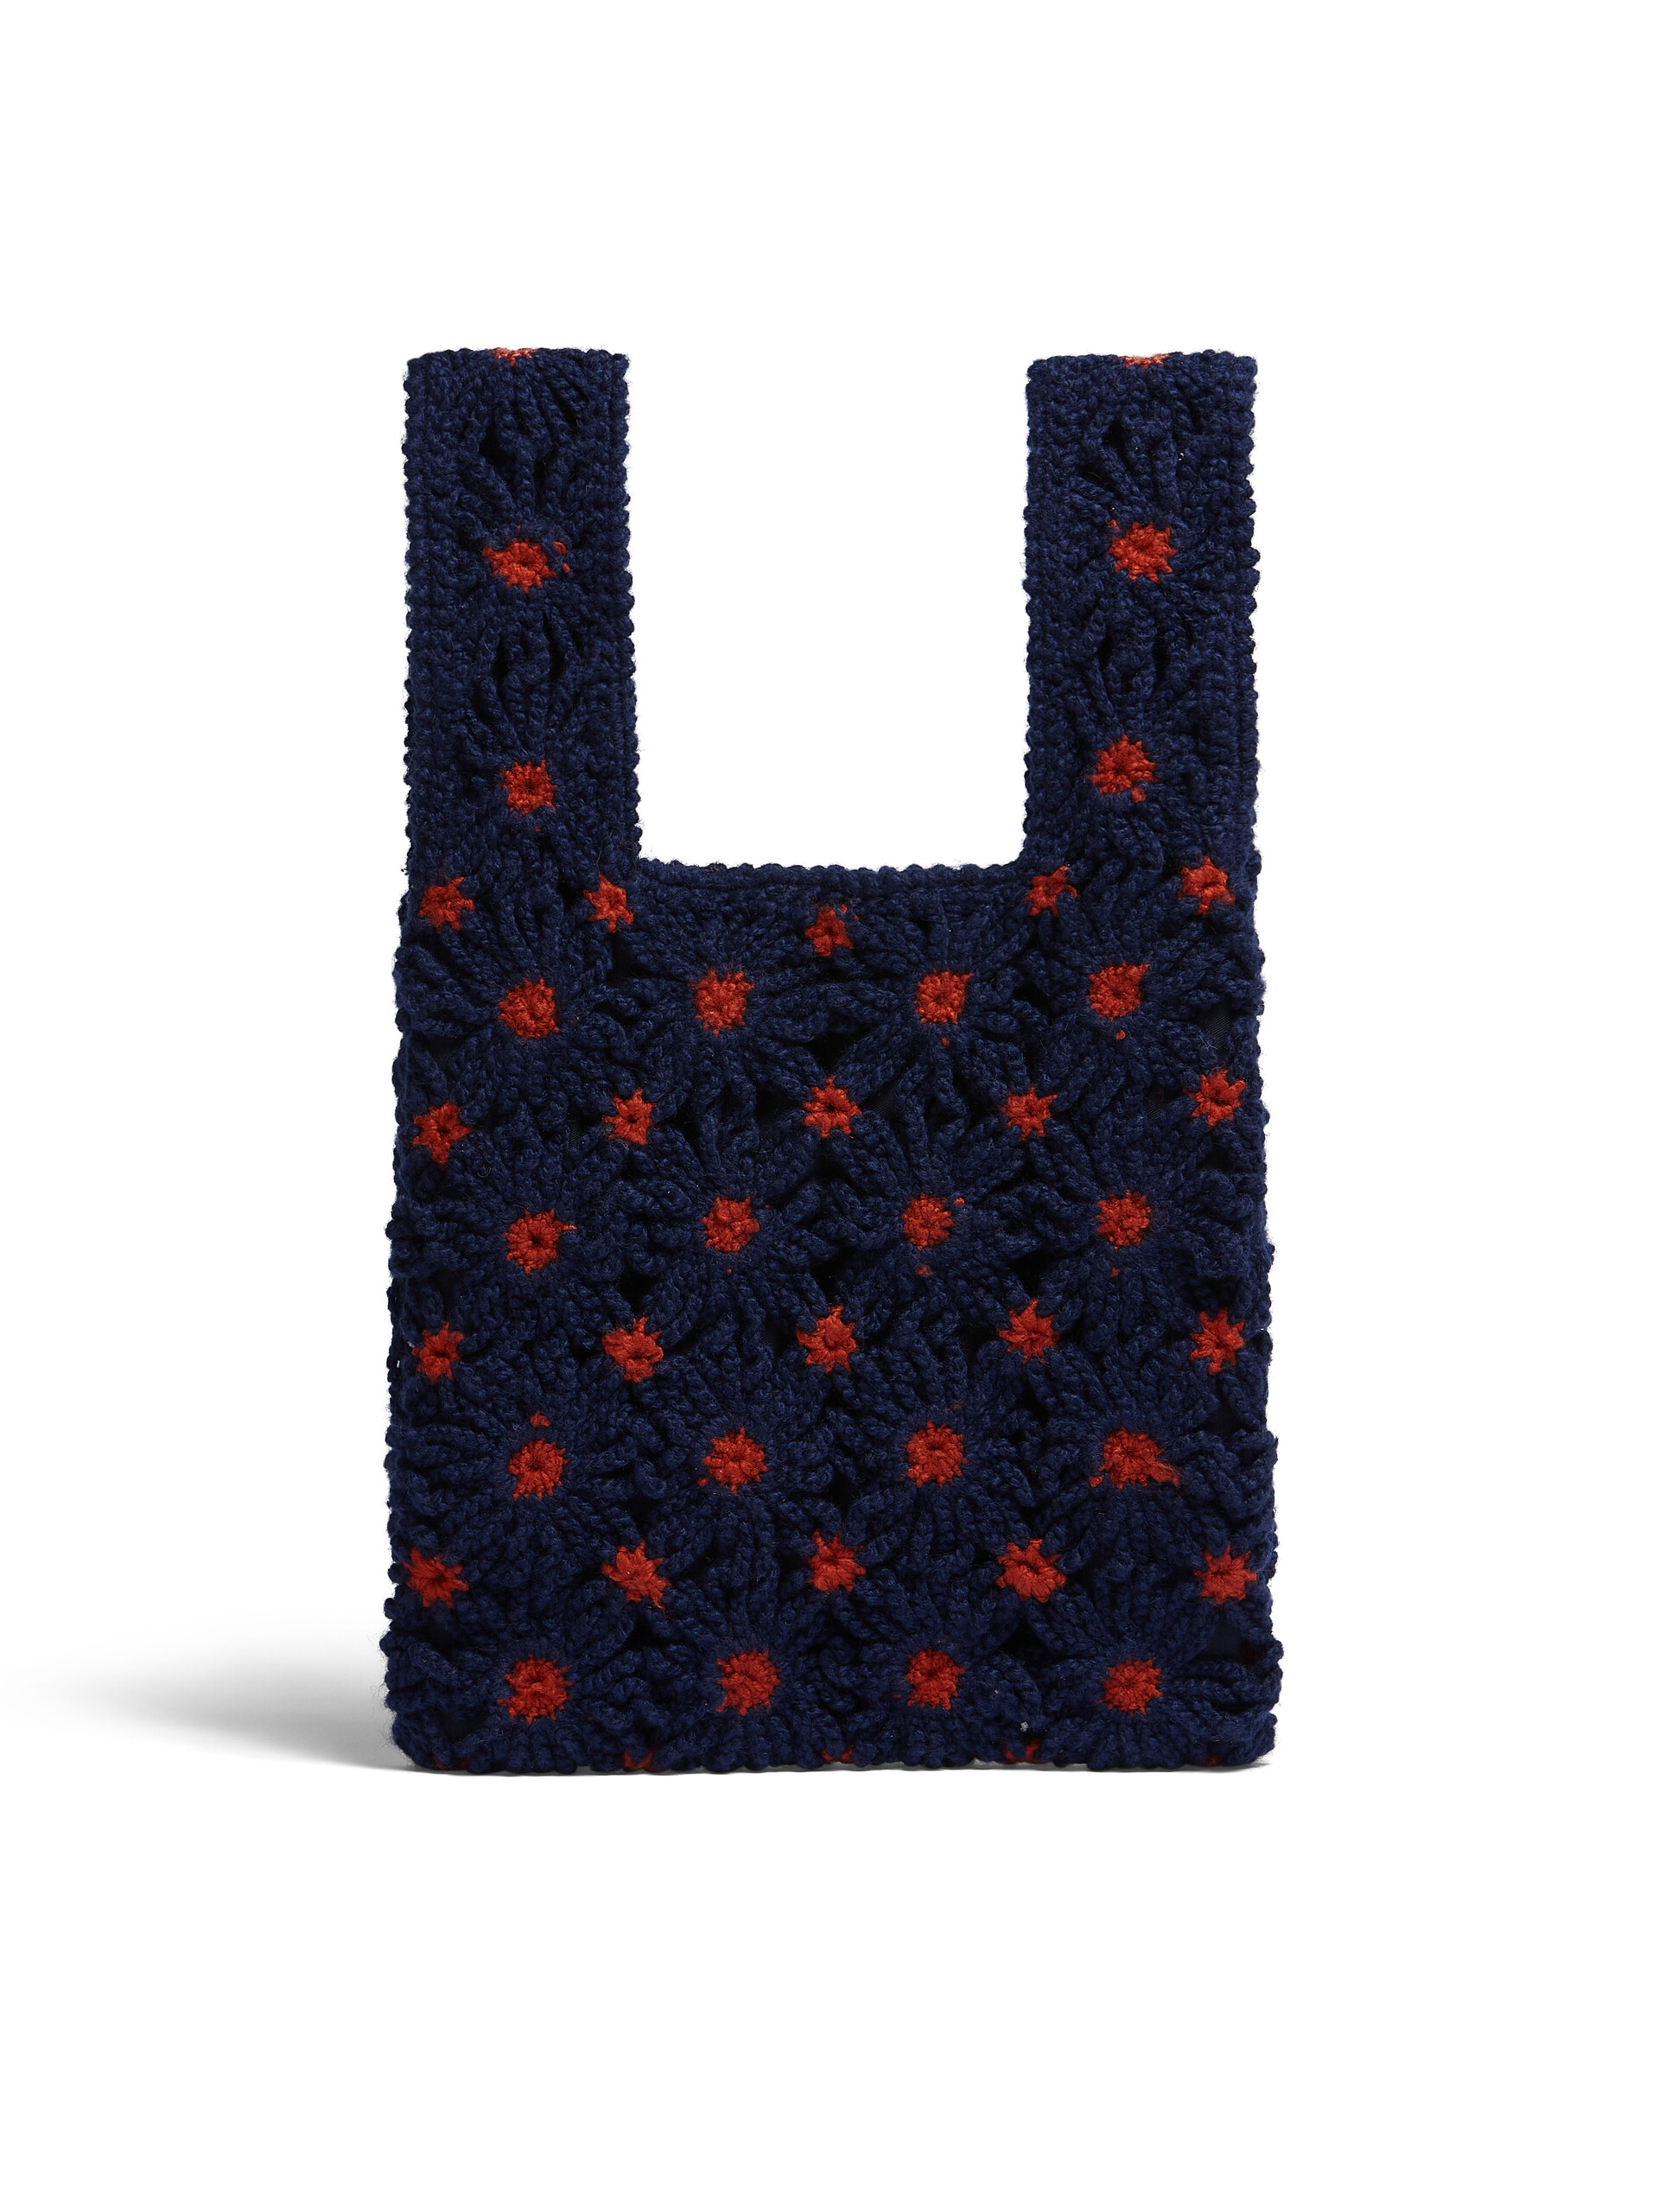 MARNI MARKET FISH bag in blue and red crochet - Shopping Bags - Image 3